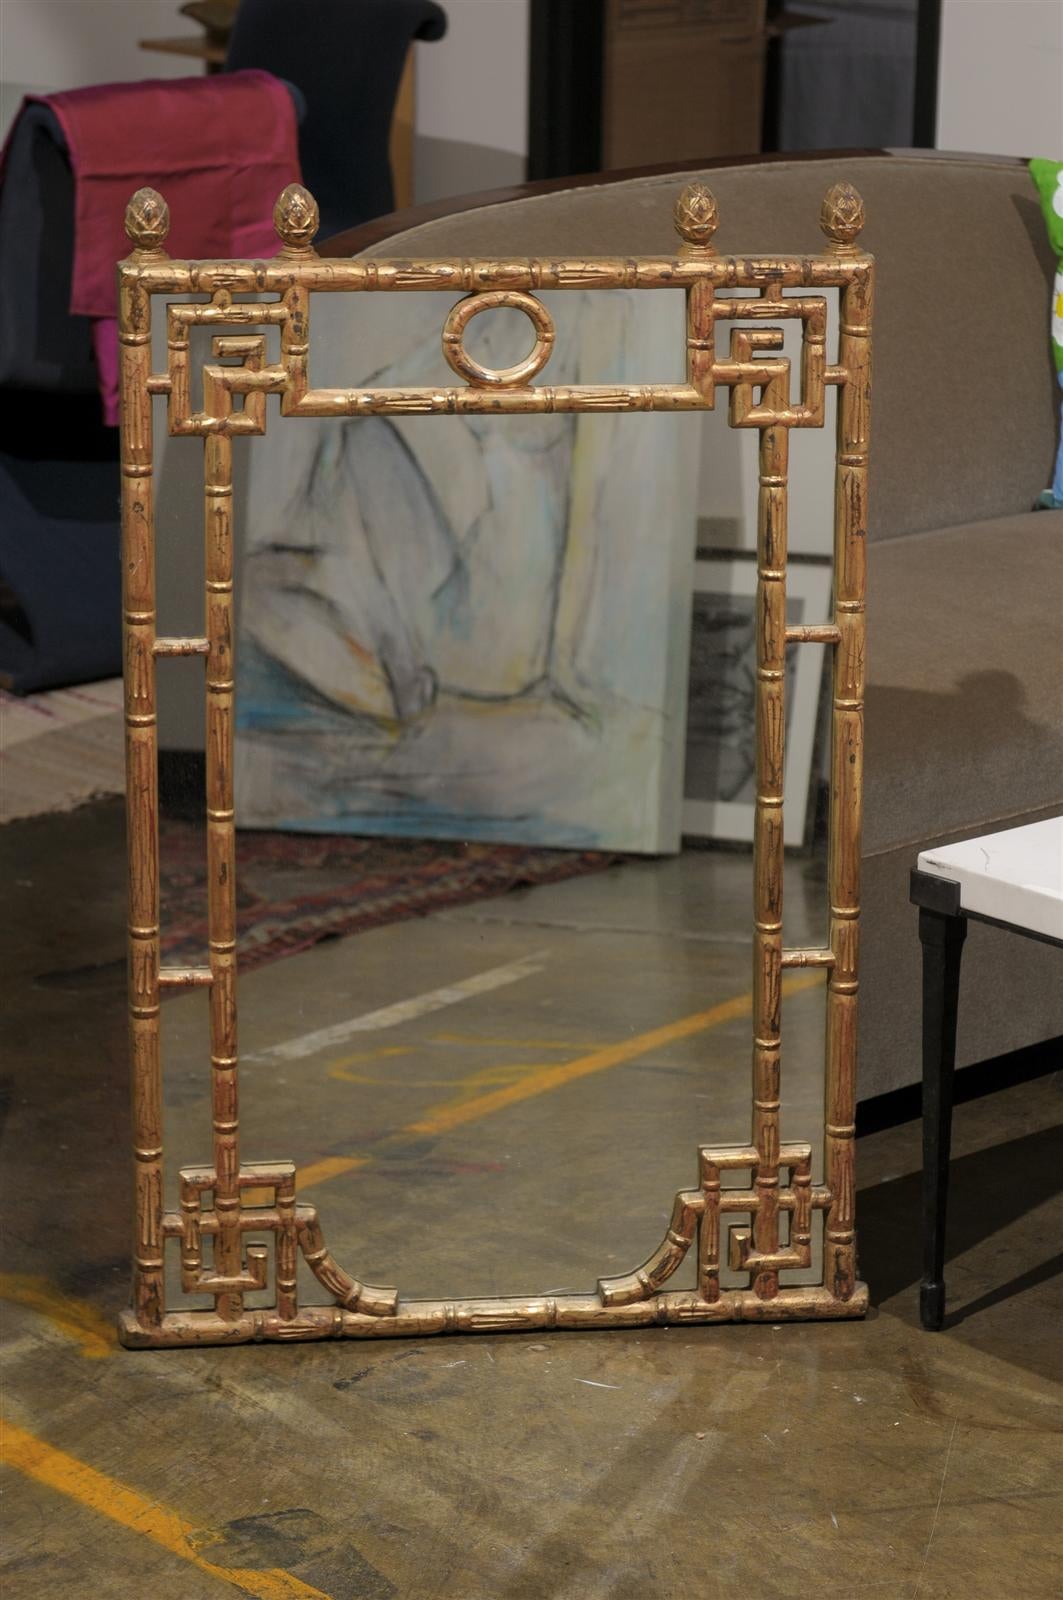 Mid-20th century mirror in the Hollywood Regency style with inset Asian inspired motifs on the carved giltwood bamboo frame and four pineapple finials along the crown.